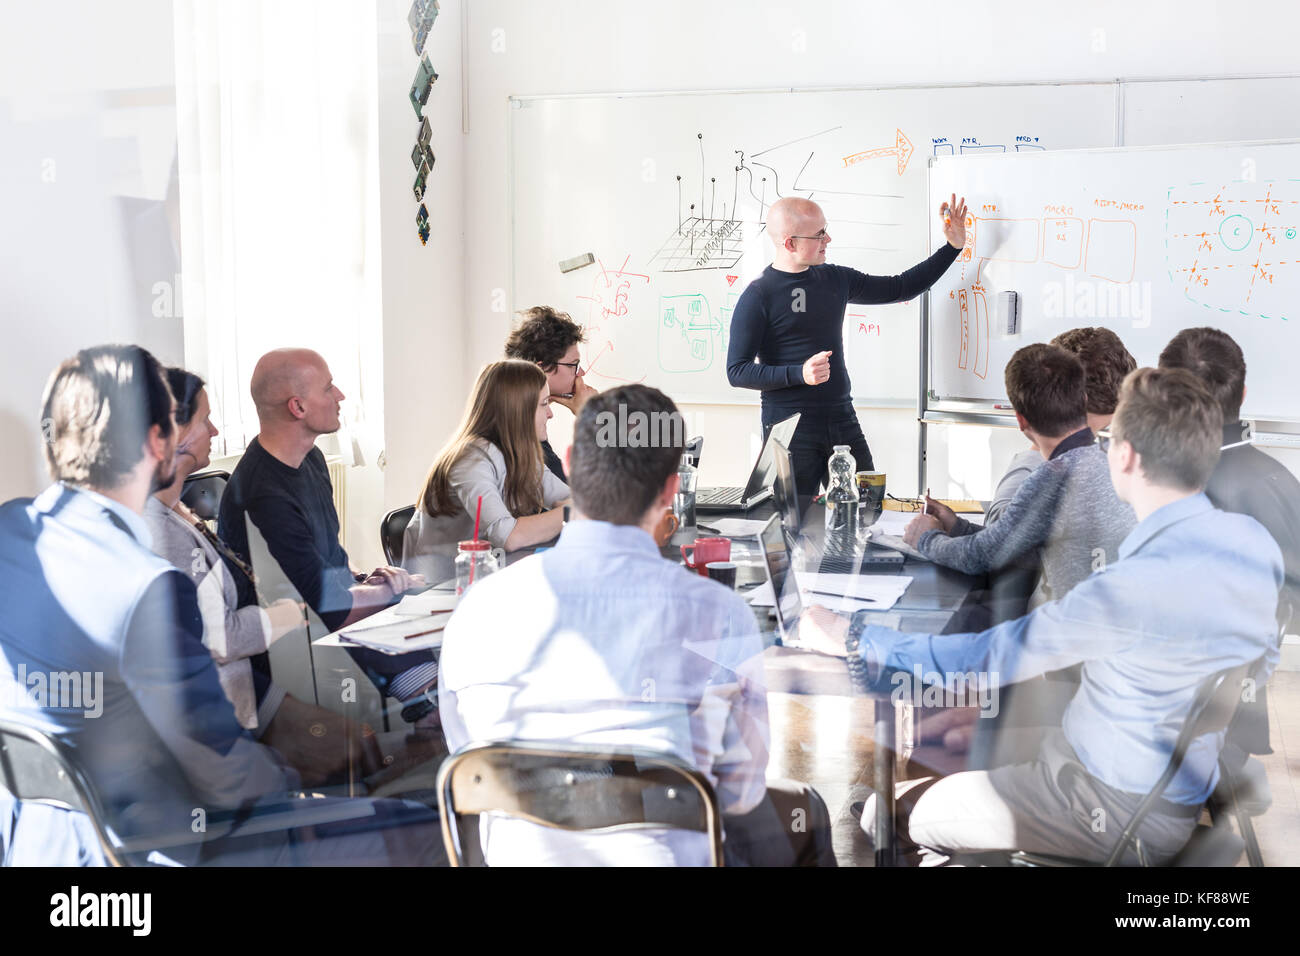 Relaxed informal IT business startup company team meeting. Stock Photo